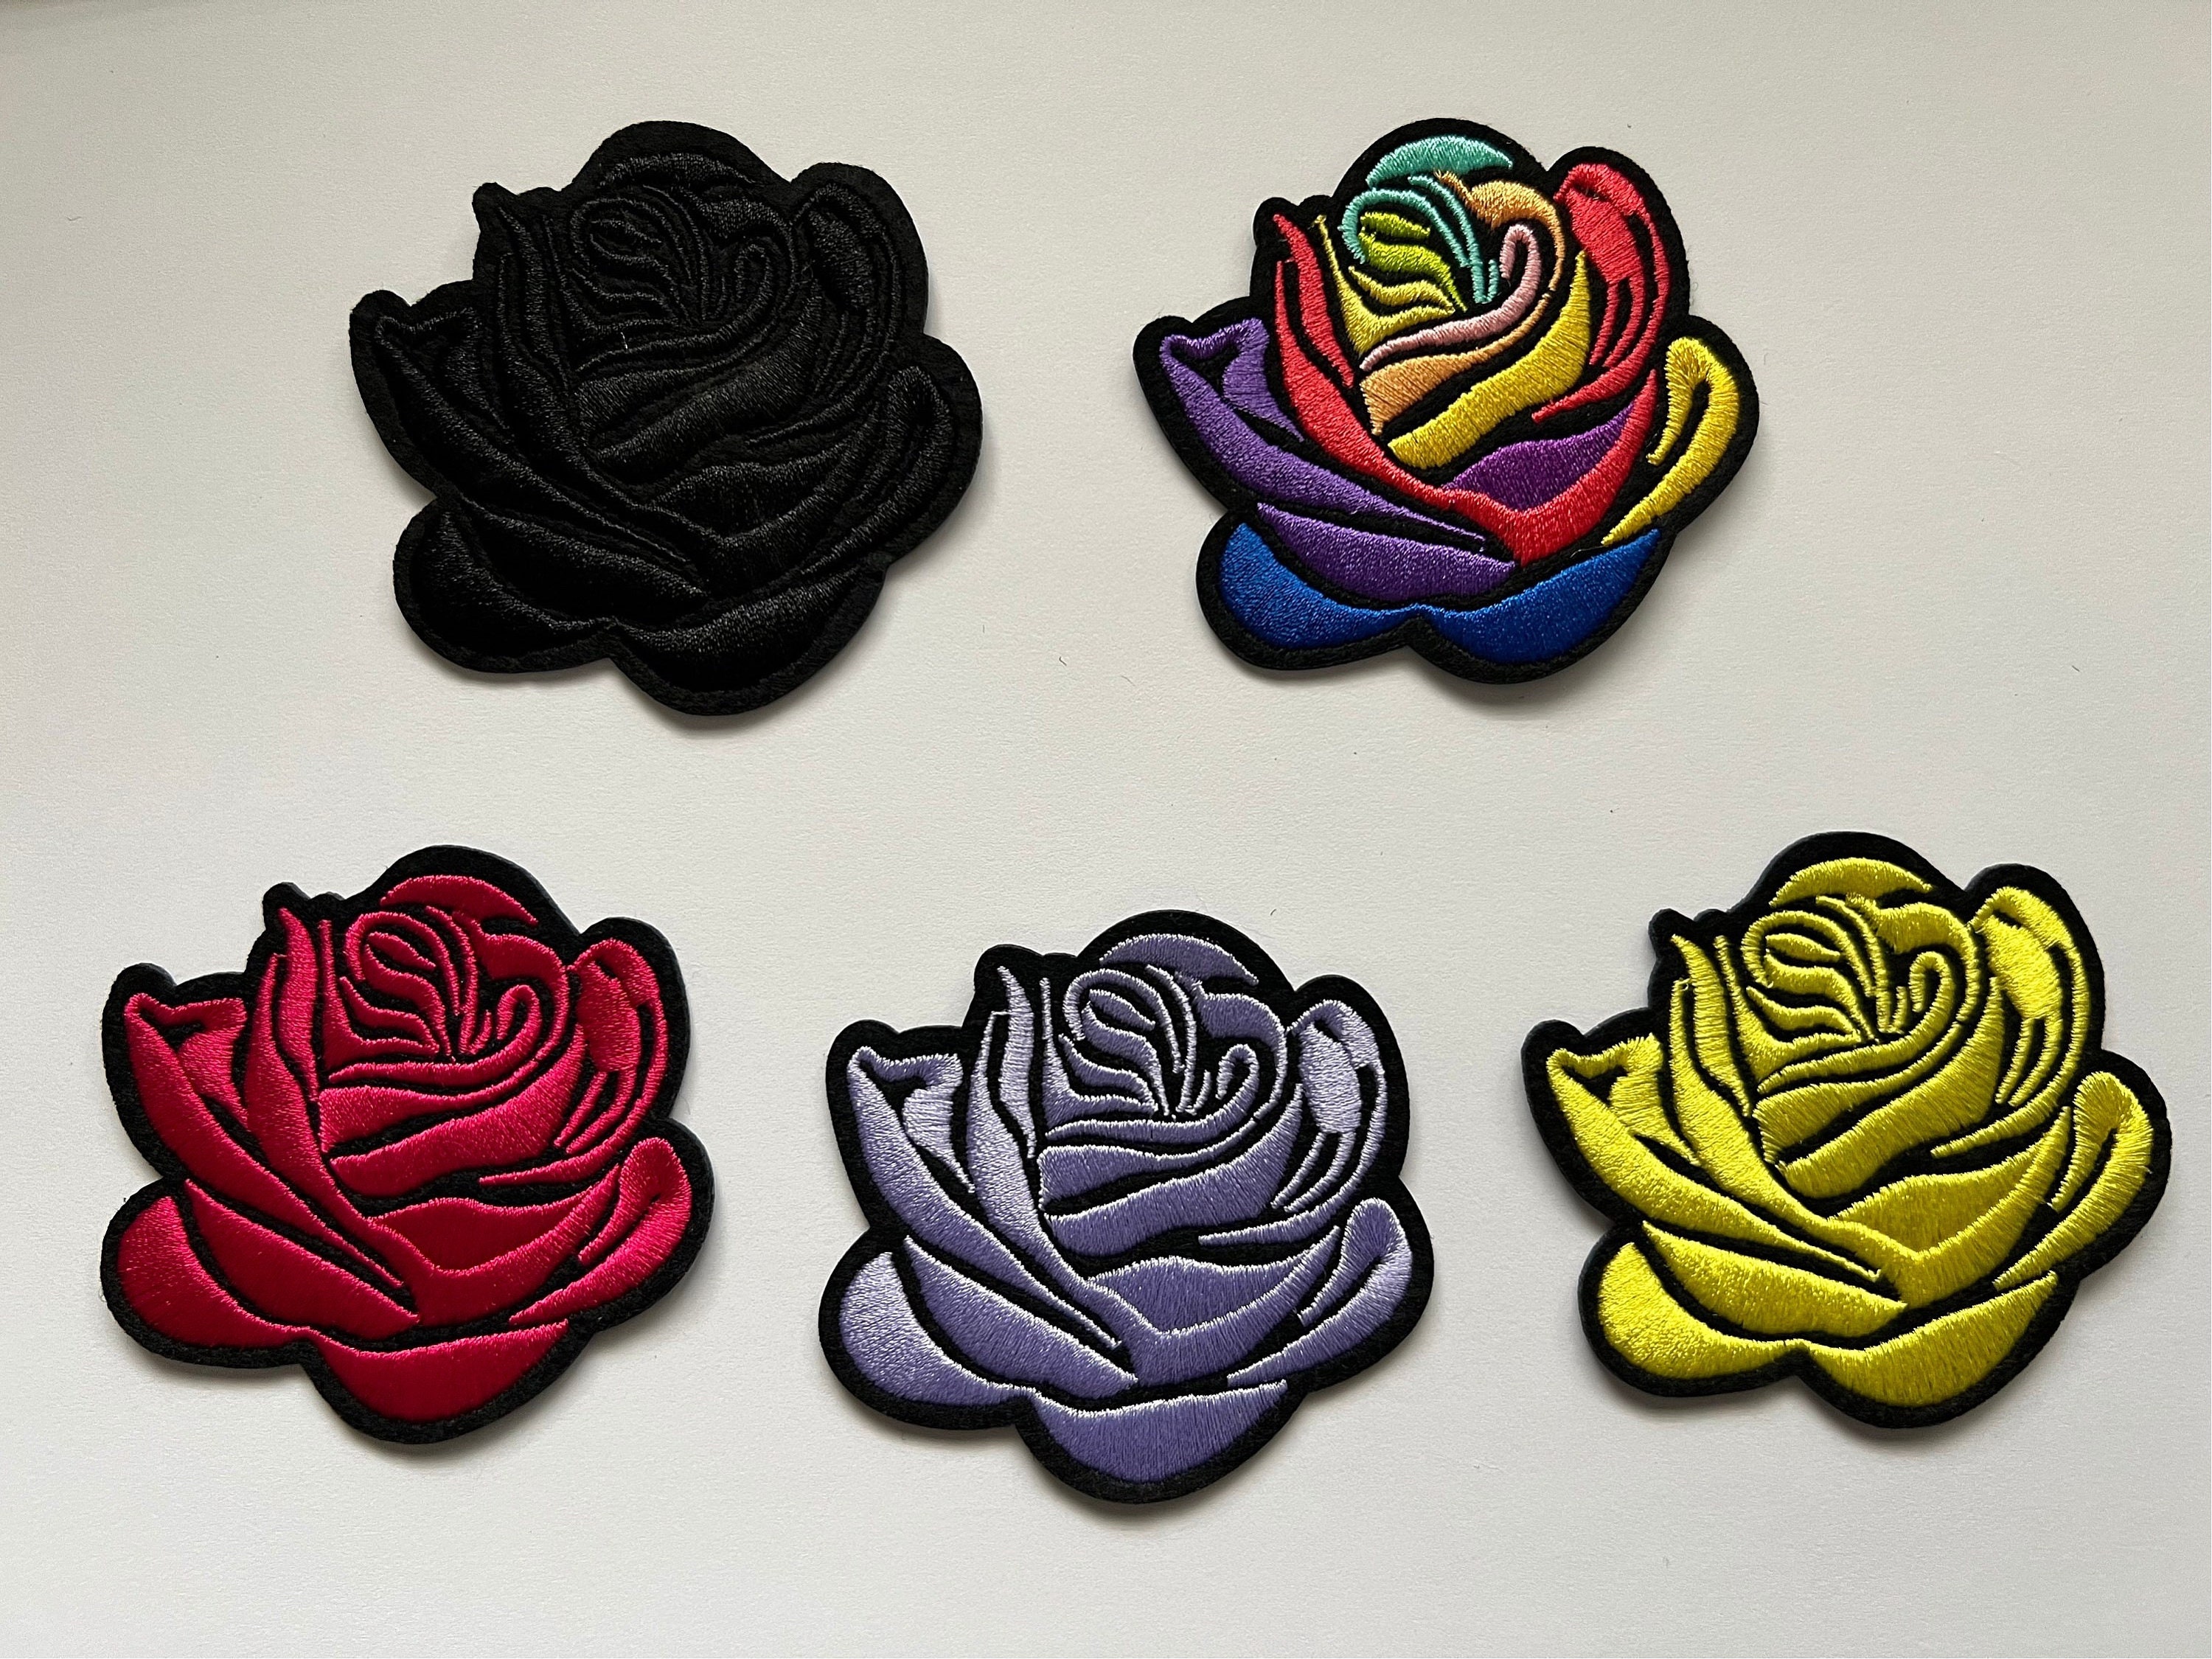 COHEALI 75 Pcs Black Rose Patch Jean Patches Iron on Inside Thigh Rose  Flowers Applique Rose Iron on Girl Hats Decor Pants Repair Patches  Decorative